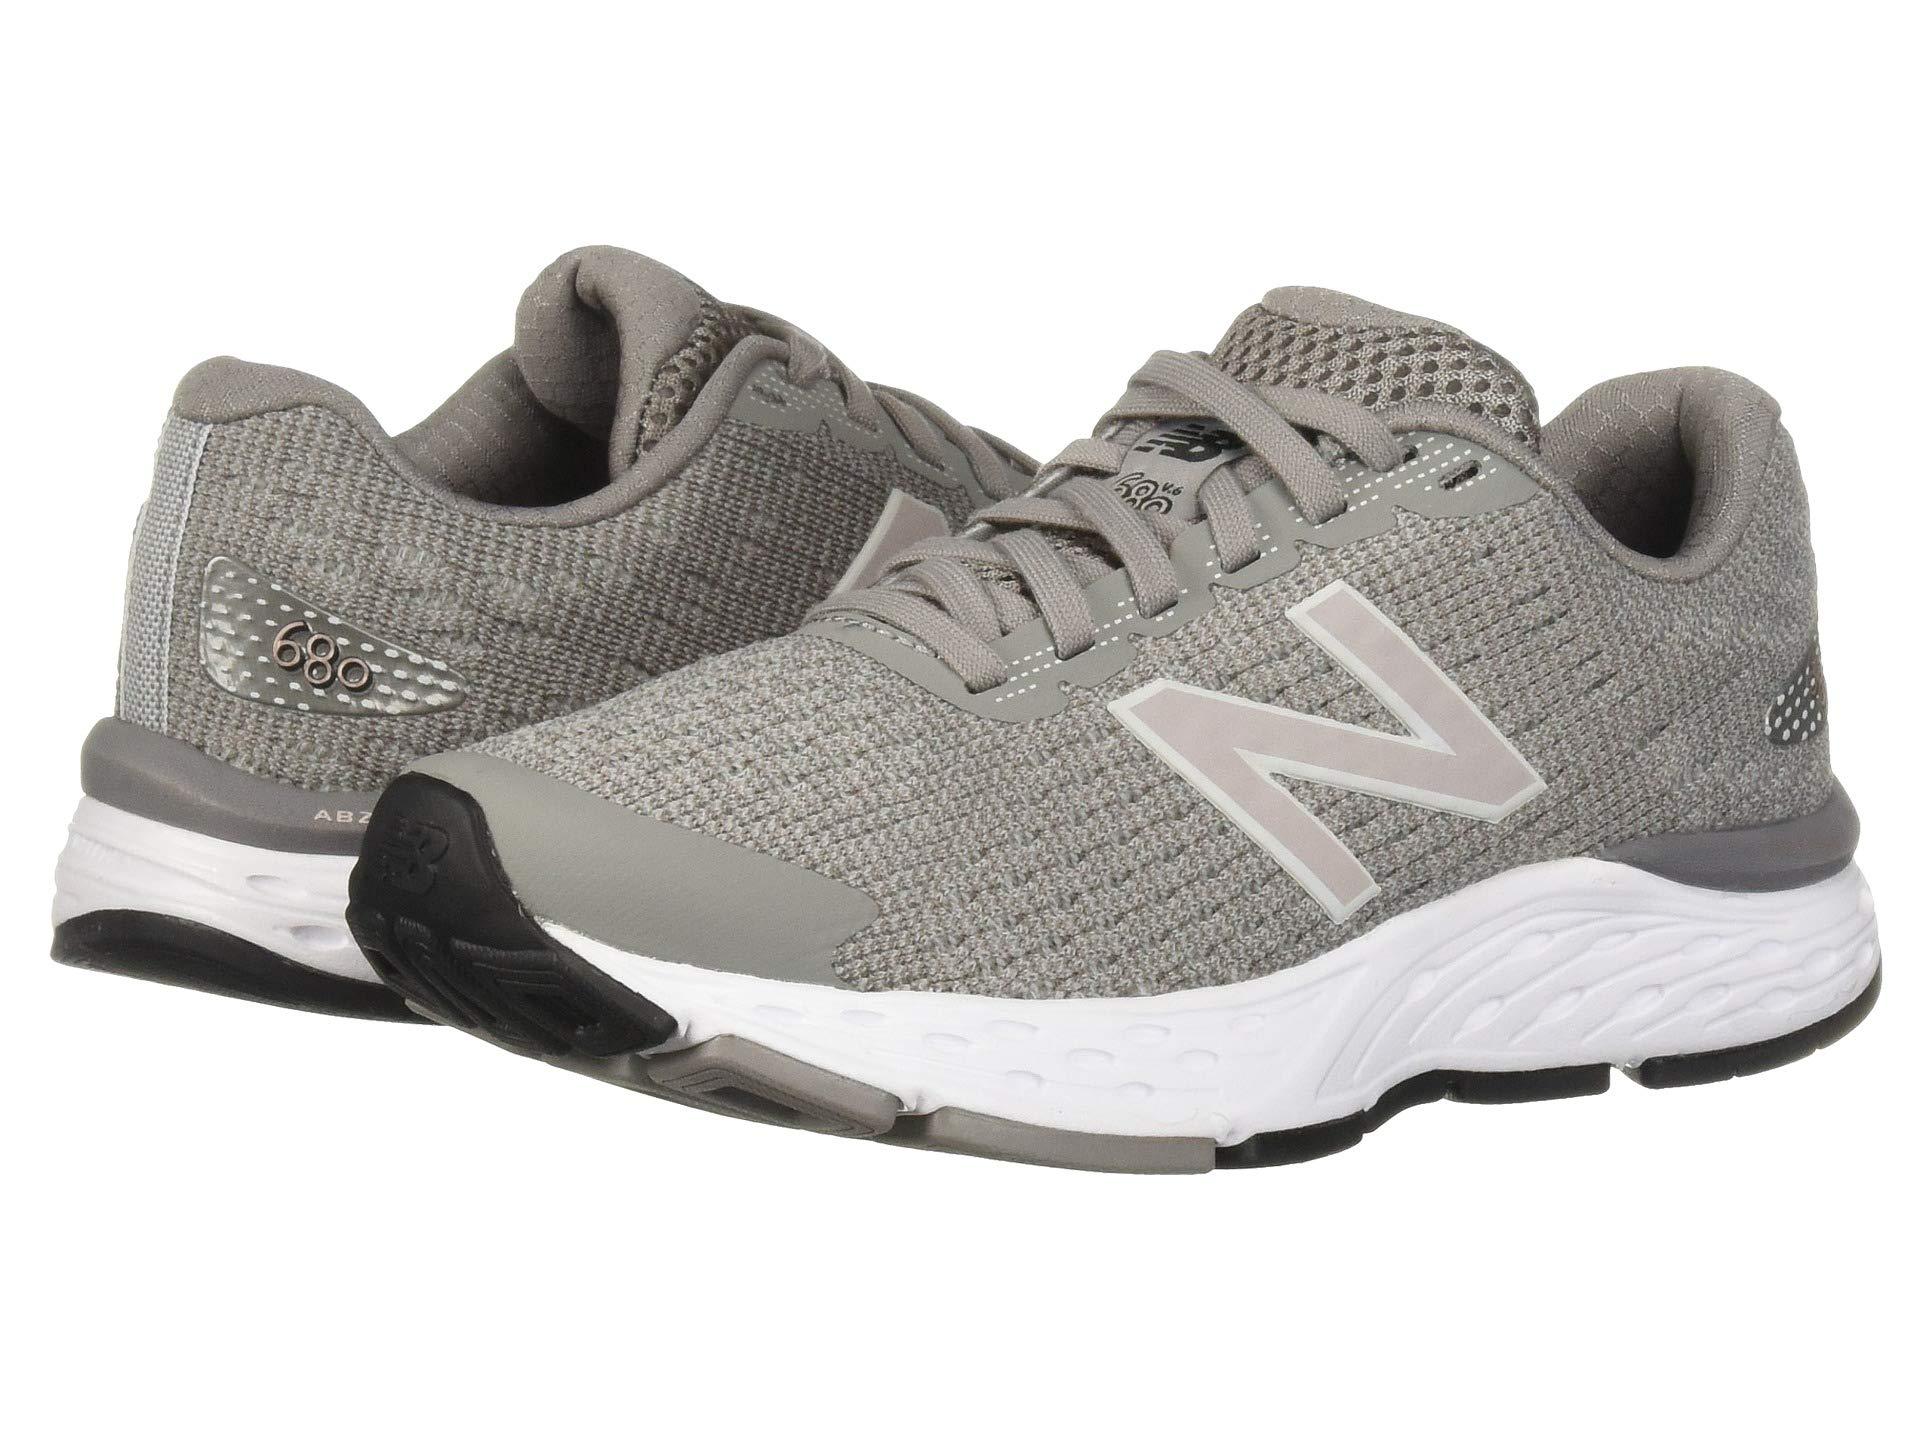 New Balance Synthetic 680v6 in Light Grey (Gray) - Save 20% - Lyst